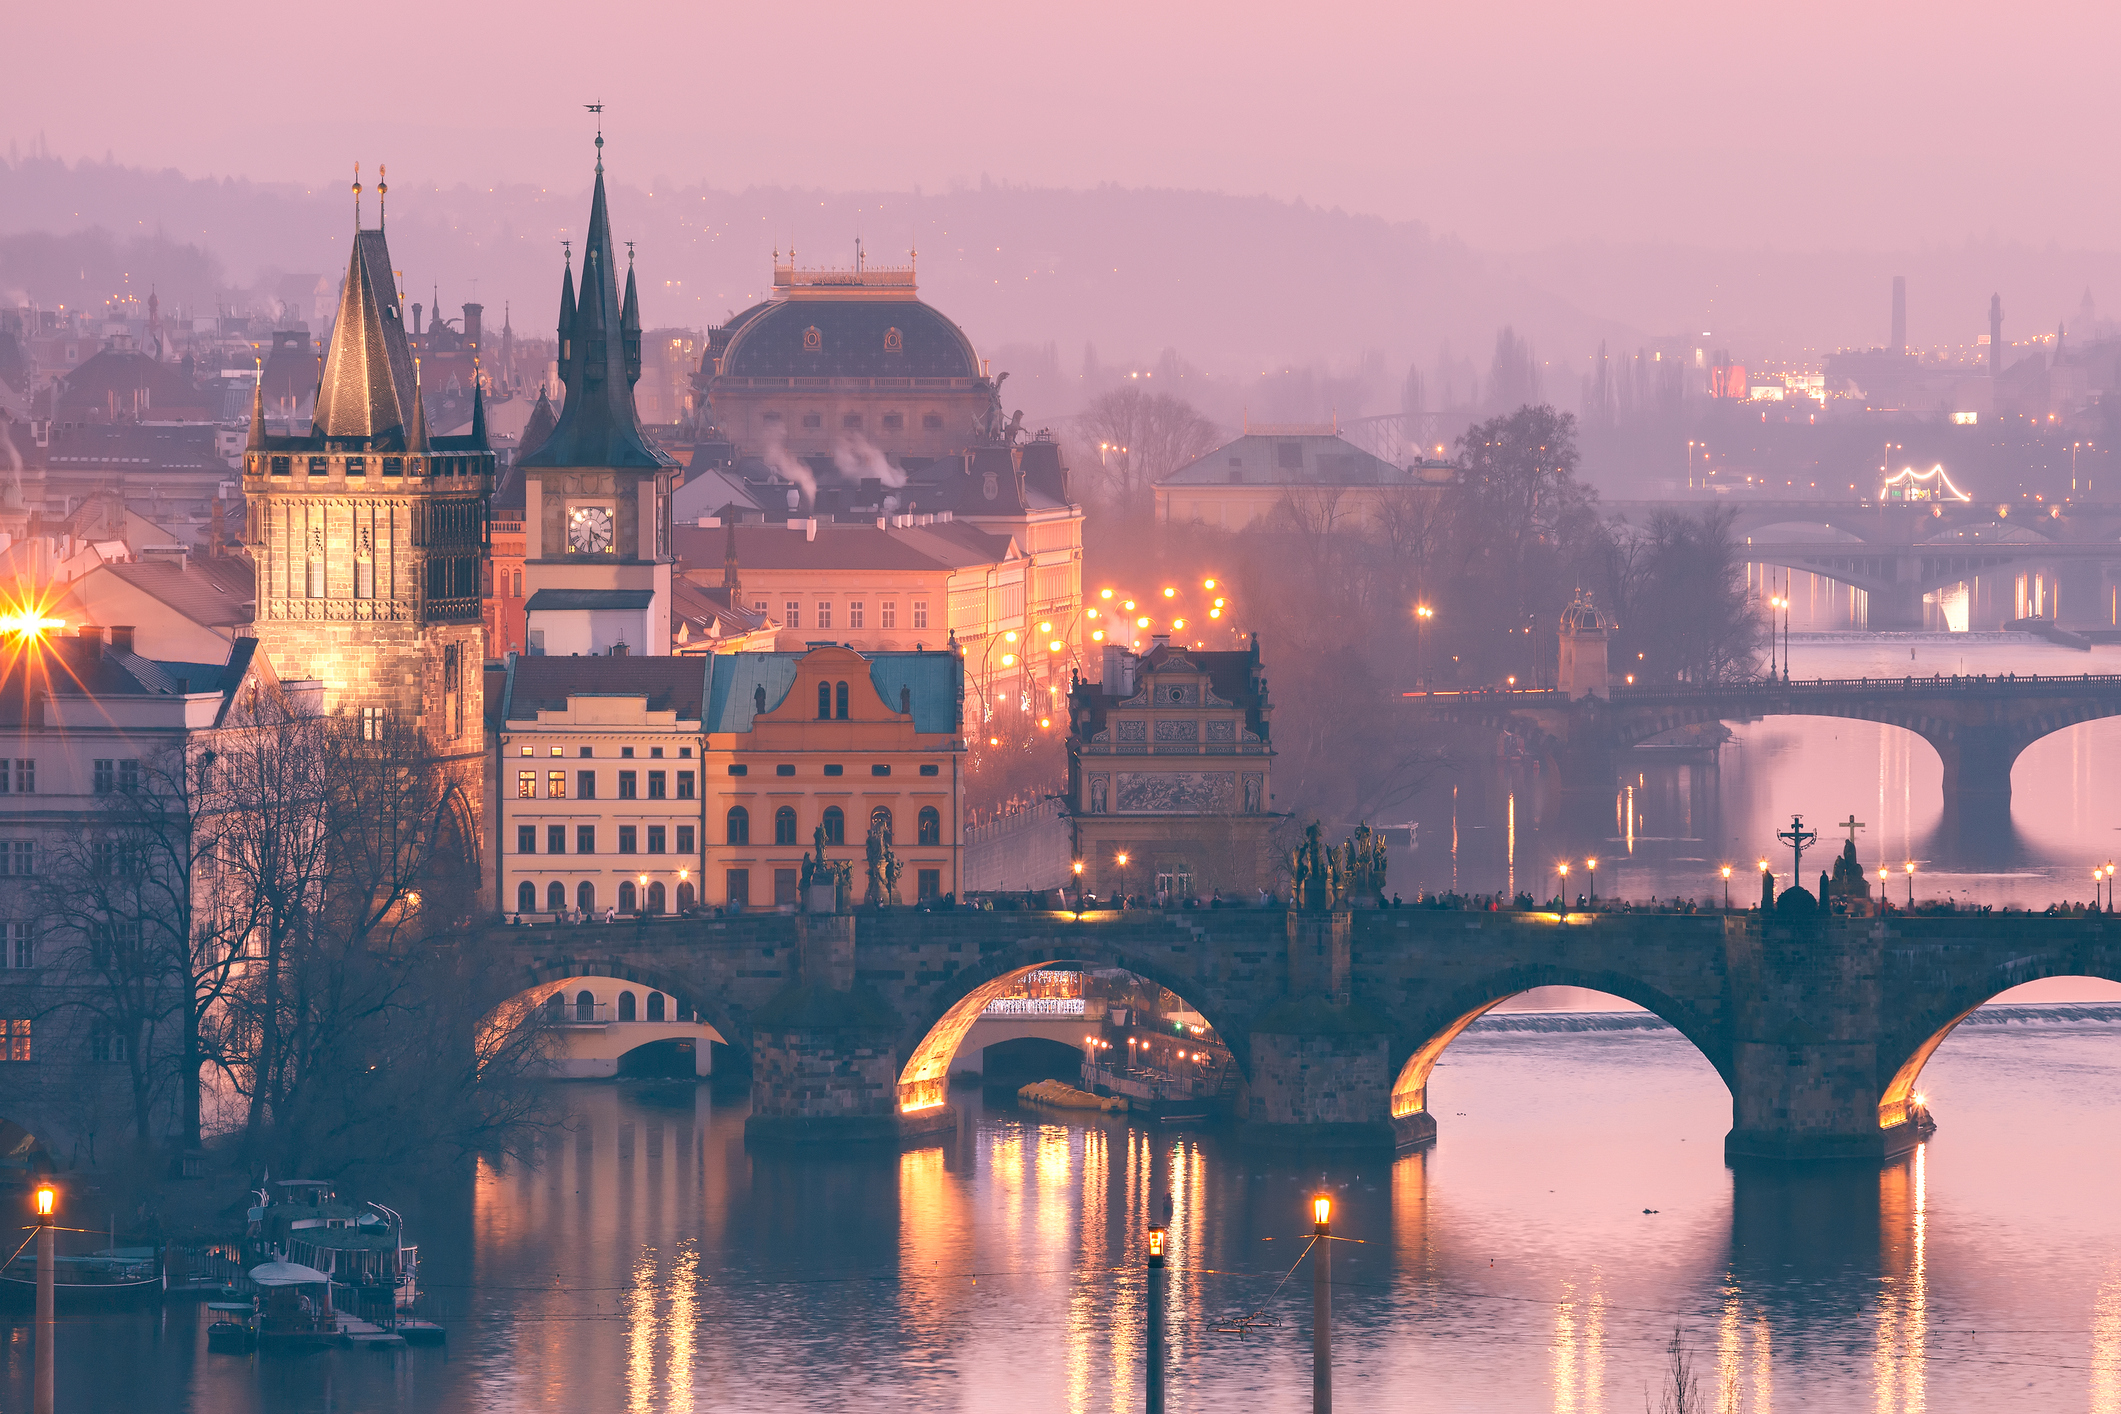 Top view over Old Town and bridges over Vltava River in Prague, Czech Republic